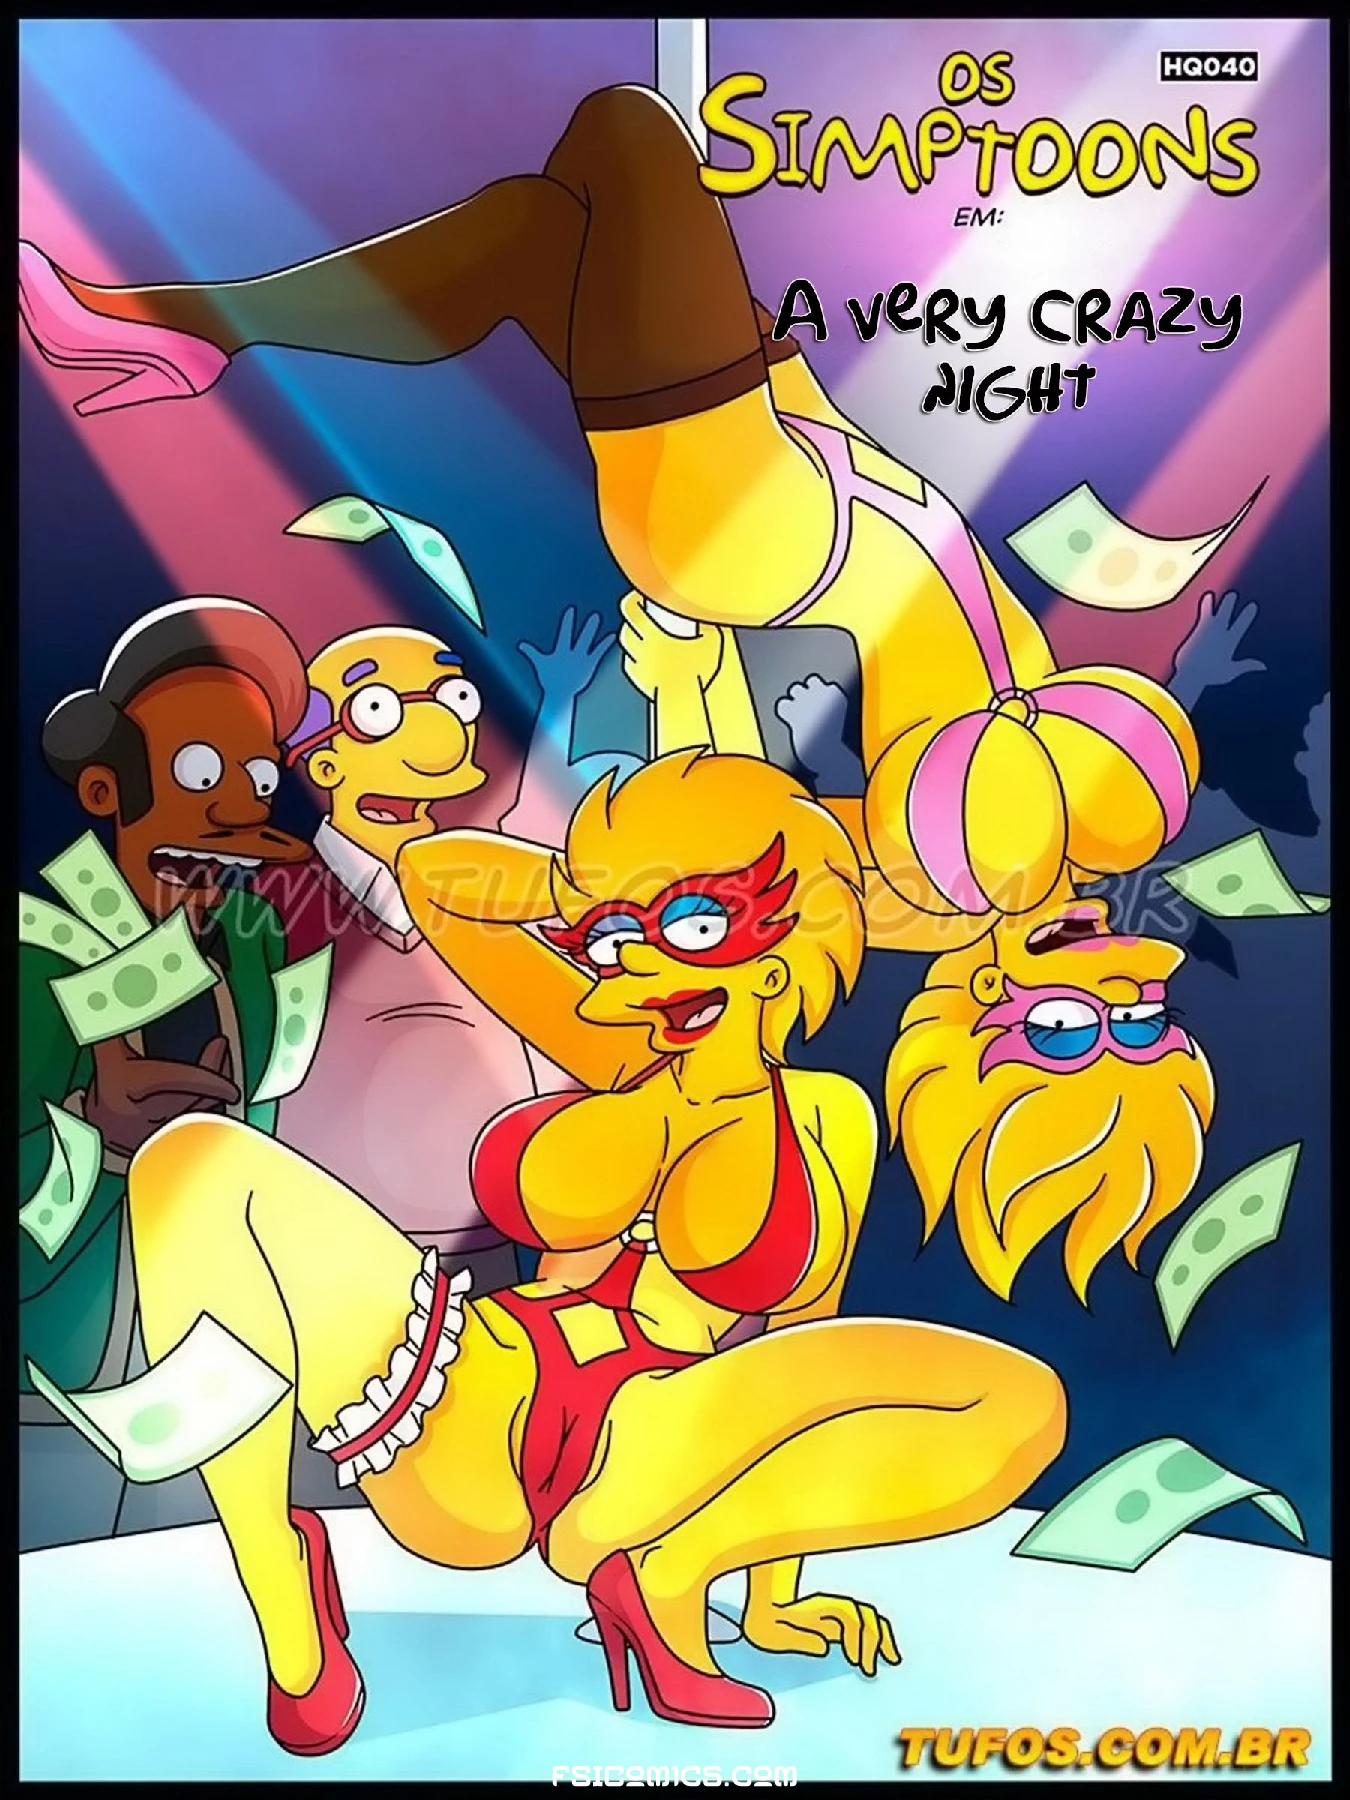 The Simpsons Chapter 40 – A Very Crazy Night – WC TF - 3 - FSIComics